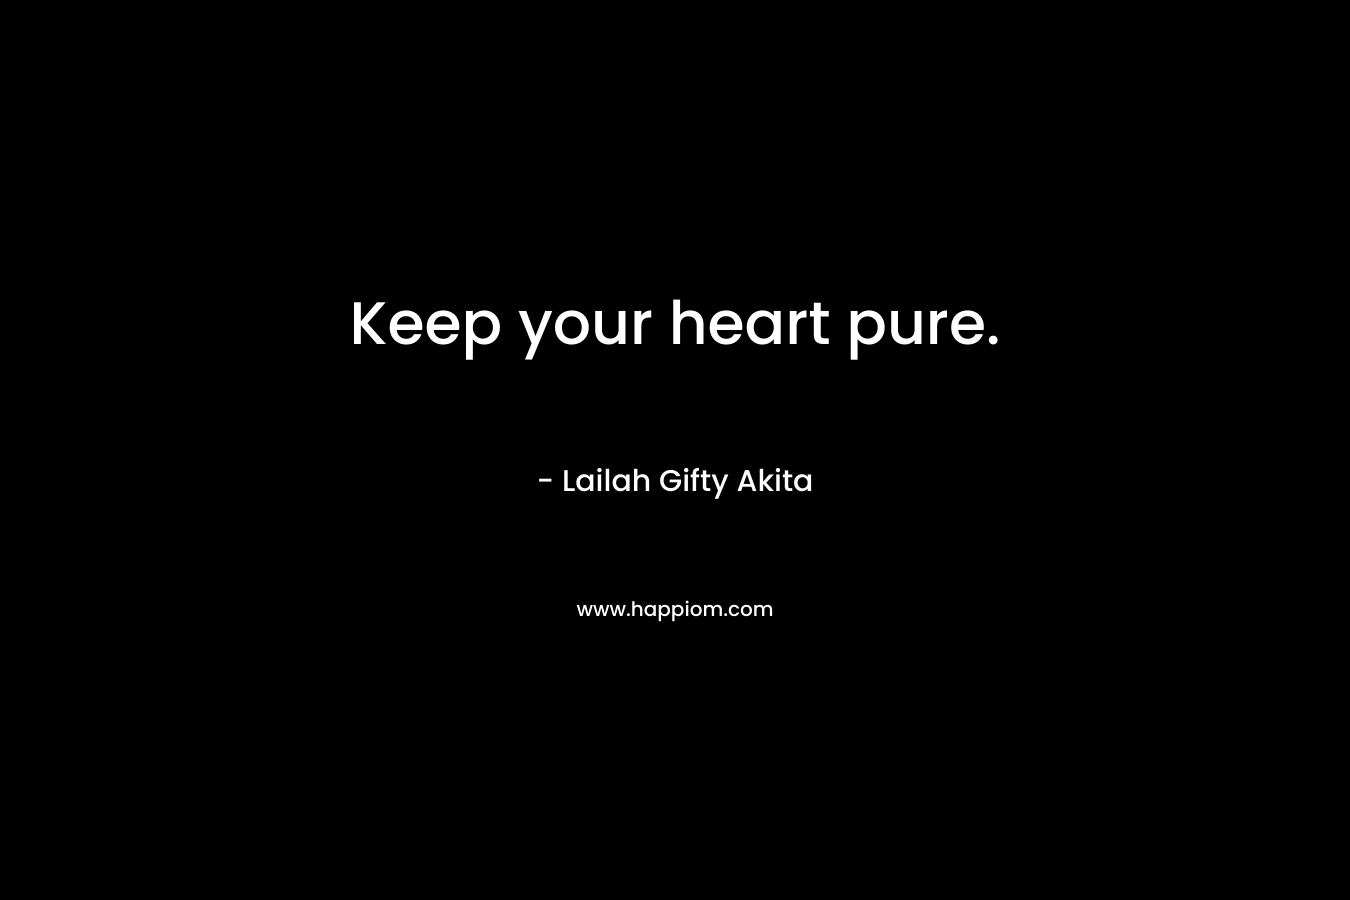 Keep your heart pure.